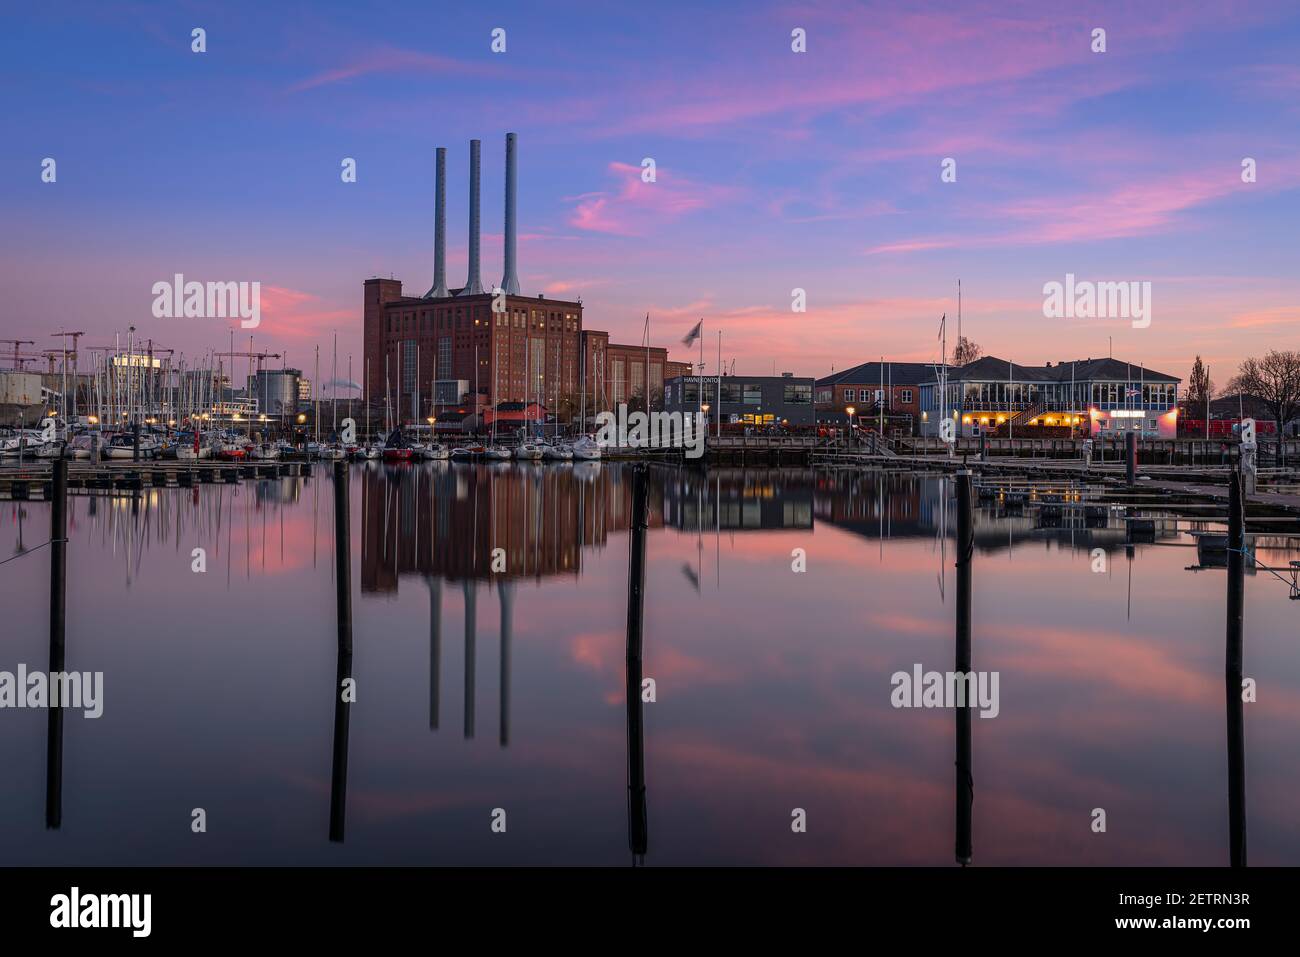 Svanemolle Power Station and the local Marina at dusk Stock Photo